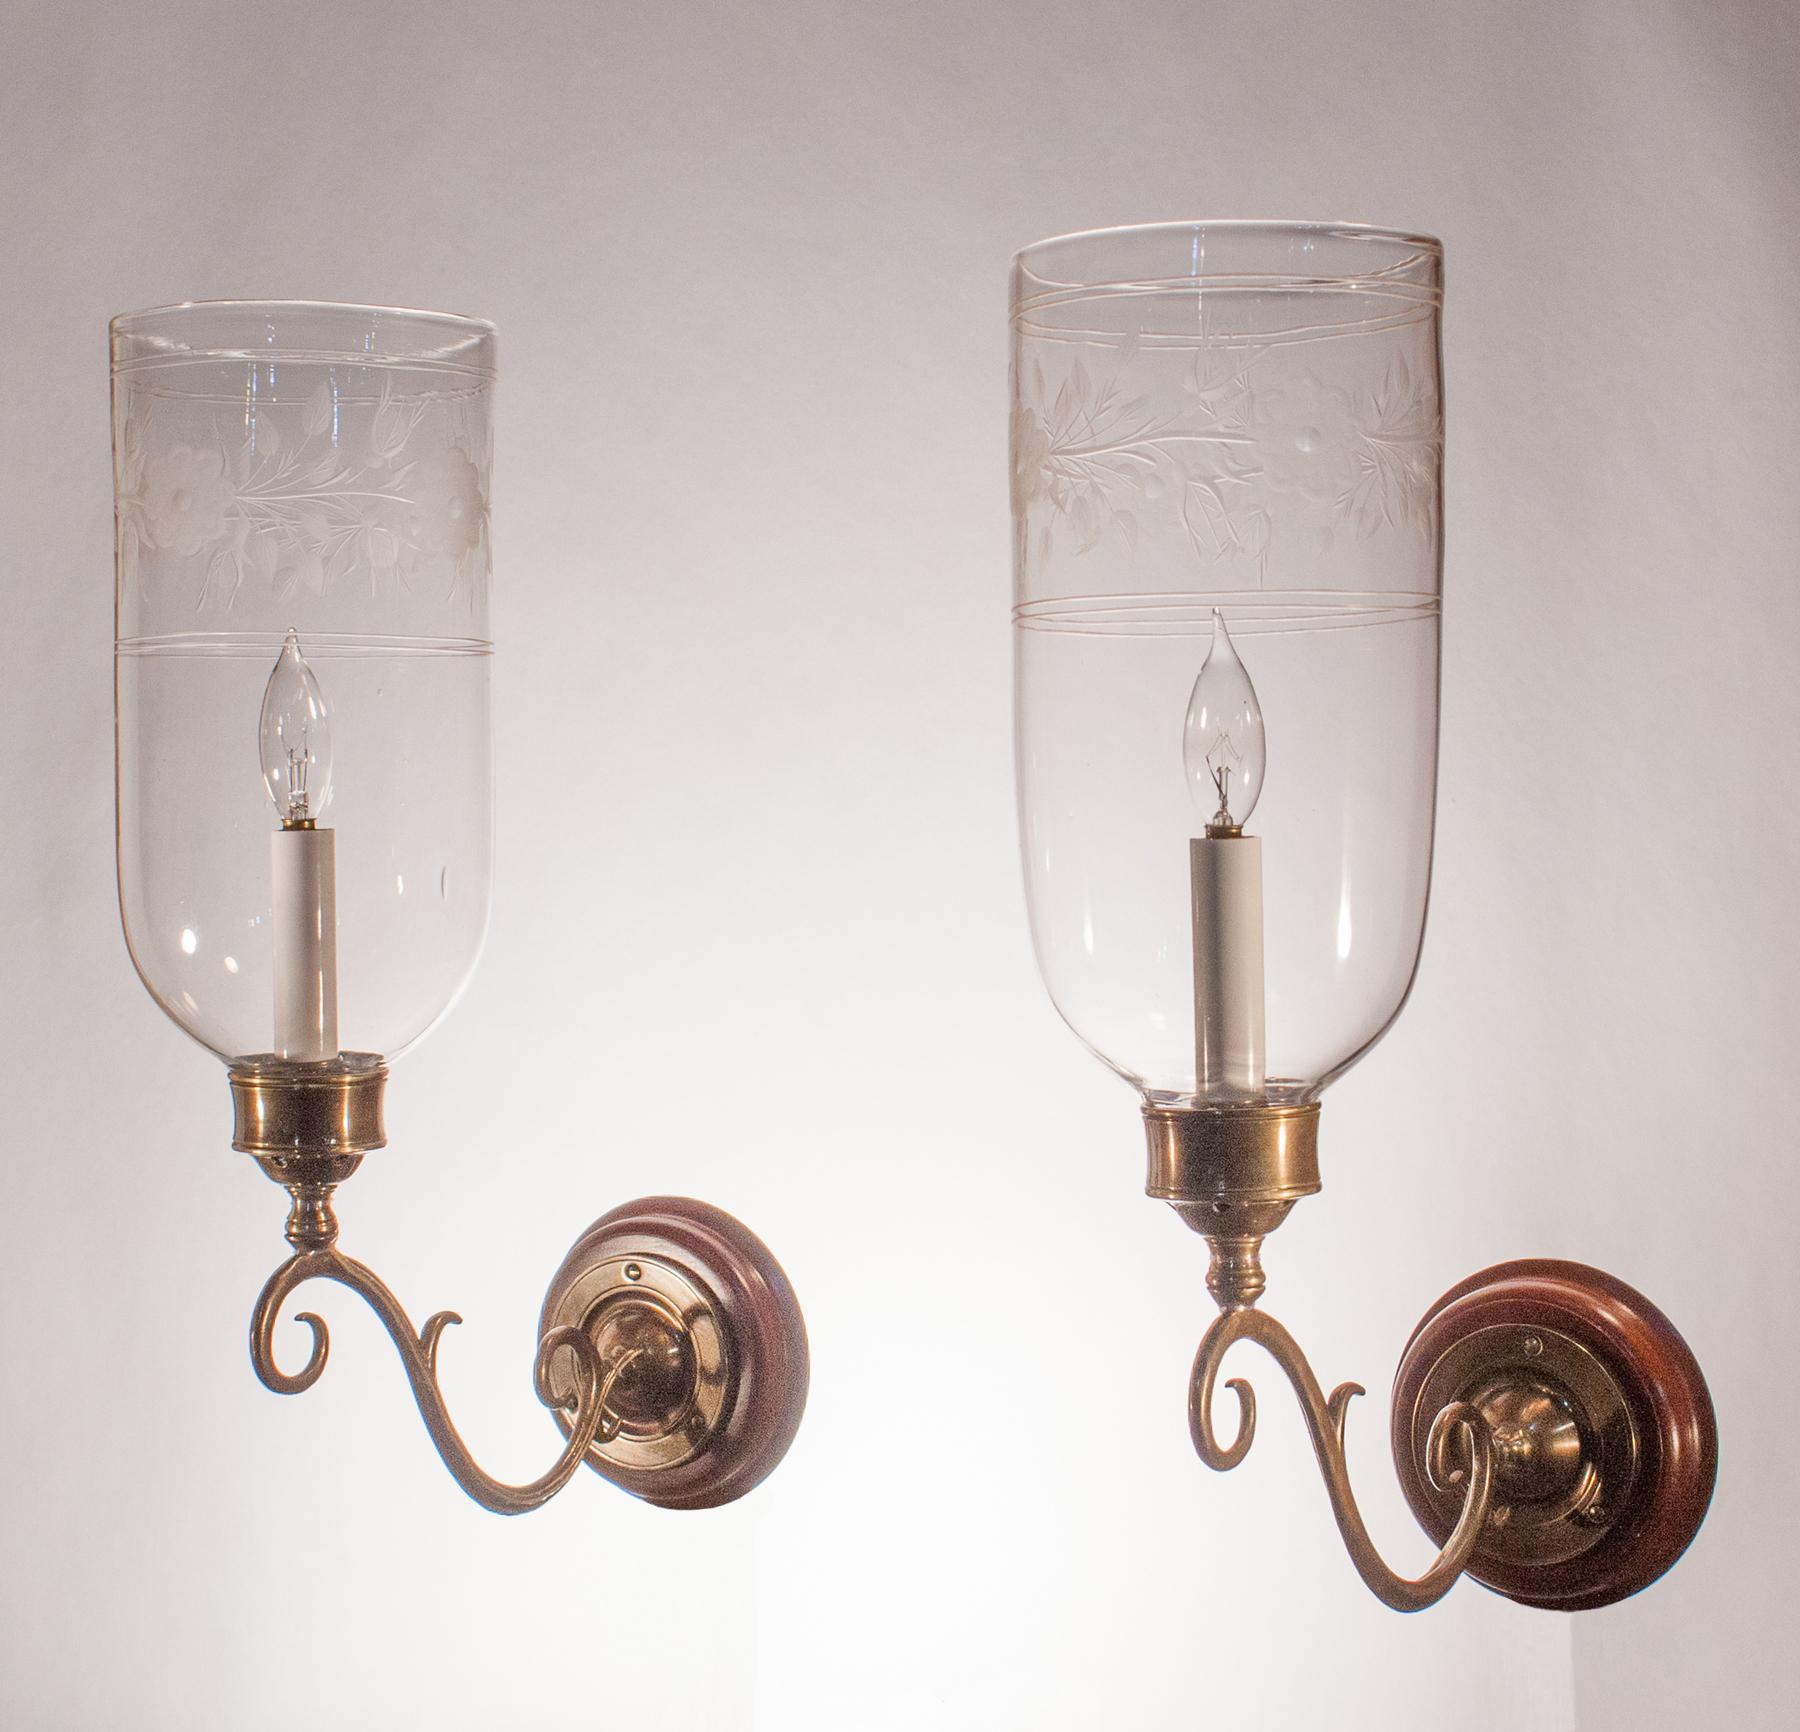 A beautiful pair of hurricane sconce shades with straight form and a tasteful flower and vine etched motif. The quality of these circa 1890 shades is very good, with desirable air bubbles in the hand blown glass. The wall sconces have been newly